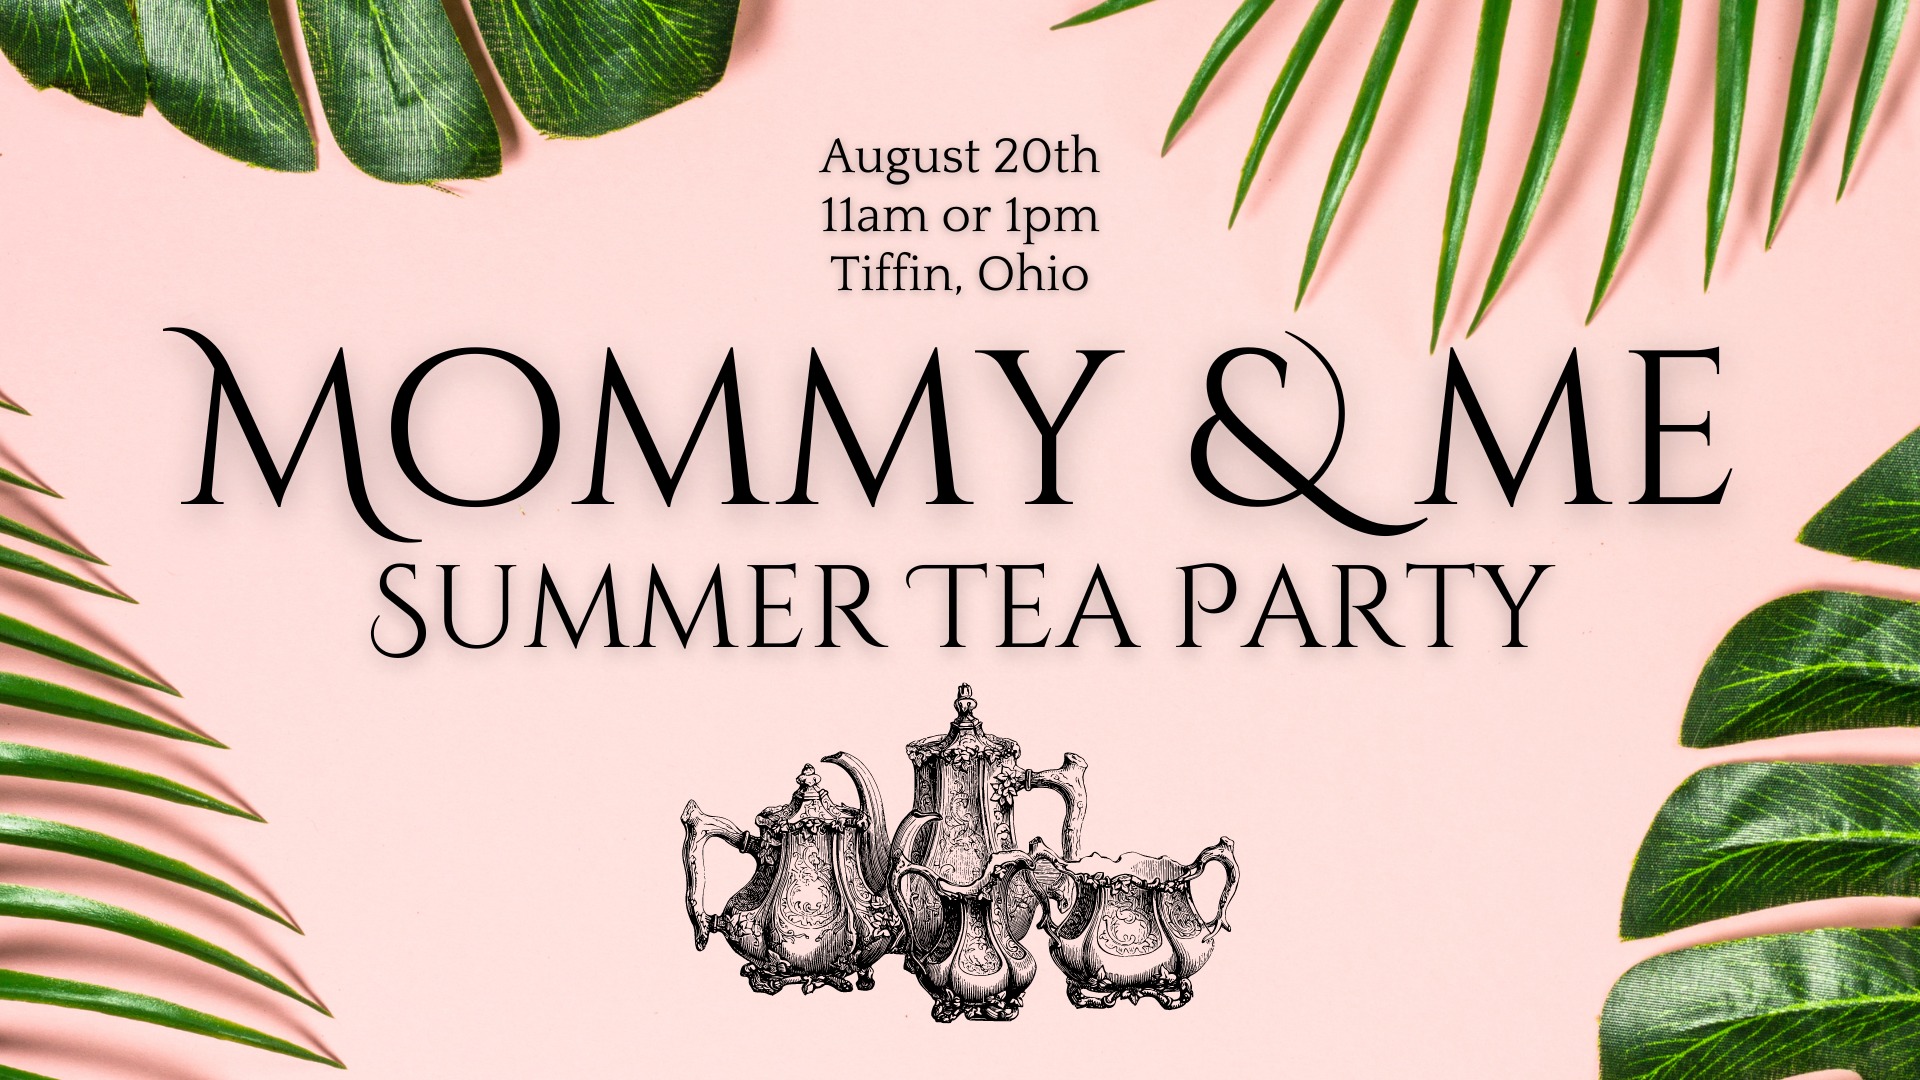 Mommy & Me Summer Tea Party